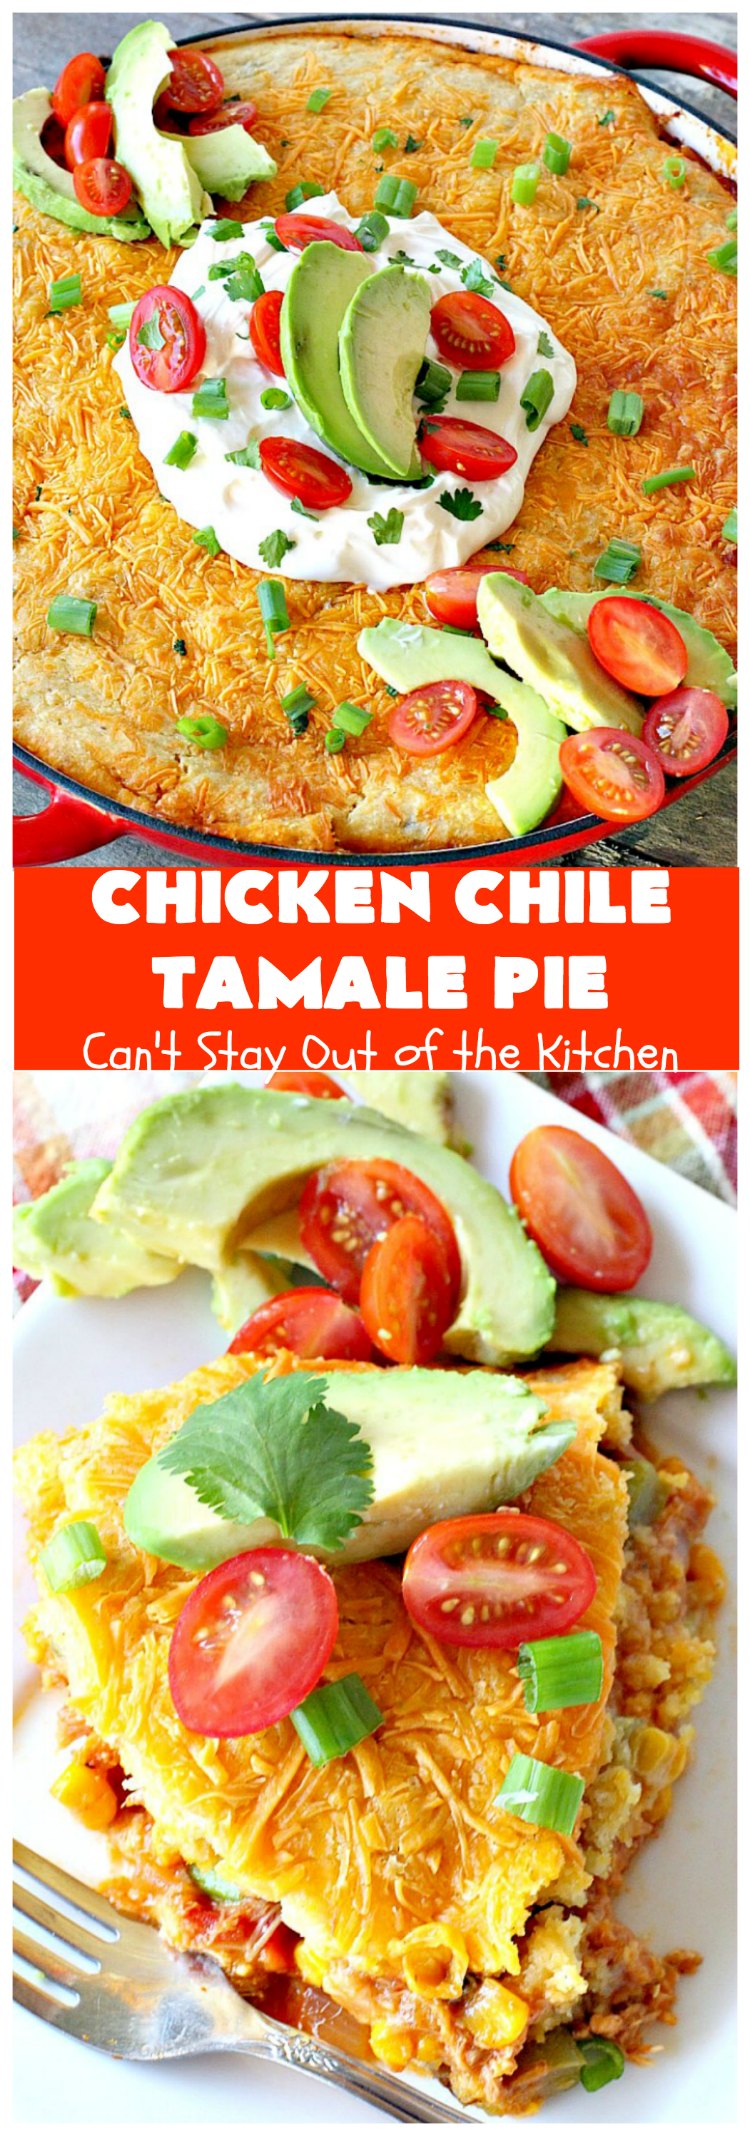 Chicken Chile Tamale Pie | Can't Stay Out of the Kitchen | this amazing #TamalePie tastes absolutely fantastic. It's perfect for #tailgating parties & potlucks. So mouthwatering you won't be able to stop eating it! #chicken #avocados #corn #olives #cheese #glutenFree #TexMex #tamales #ChickenChileTamalePie